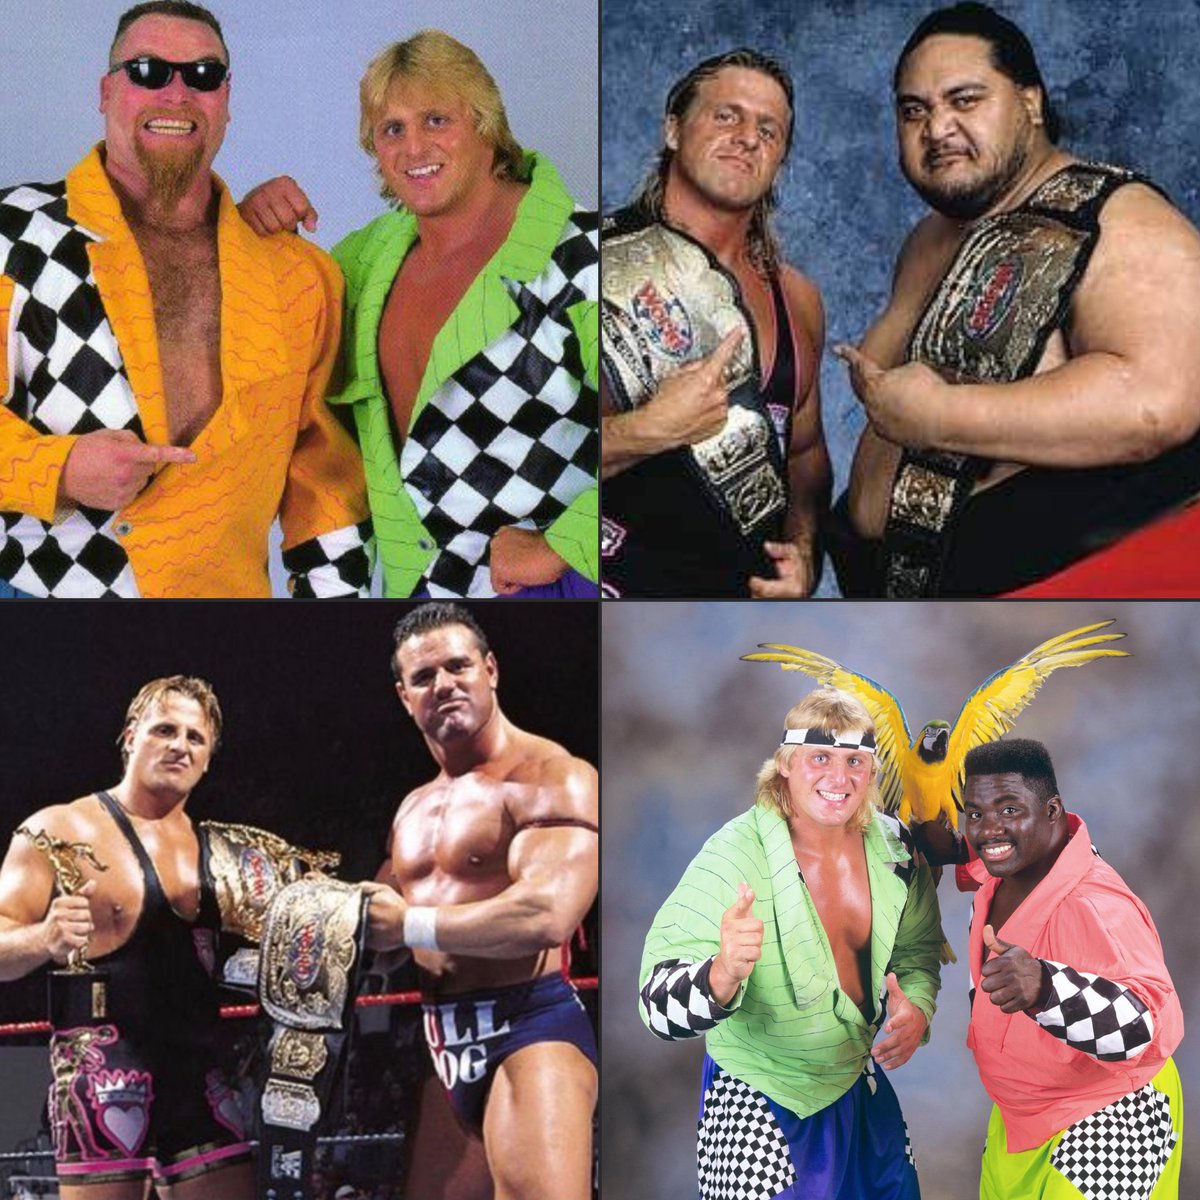 Out of the 4, what was your favourite Owen Hart tag team?
owenhartfoundation.org
#WWE #OwenHartFoundation